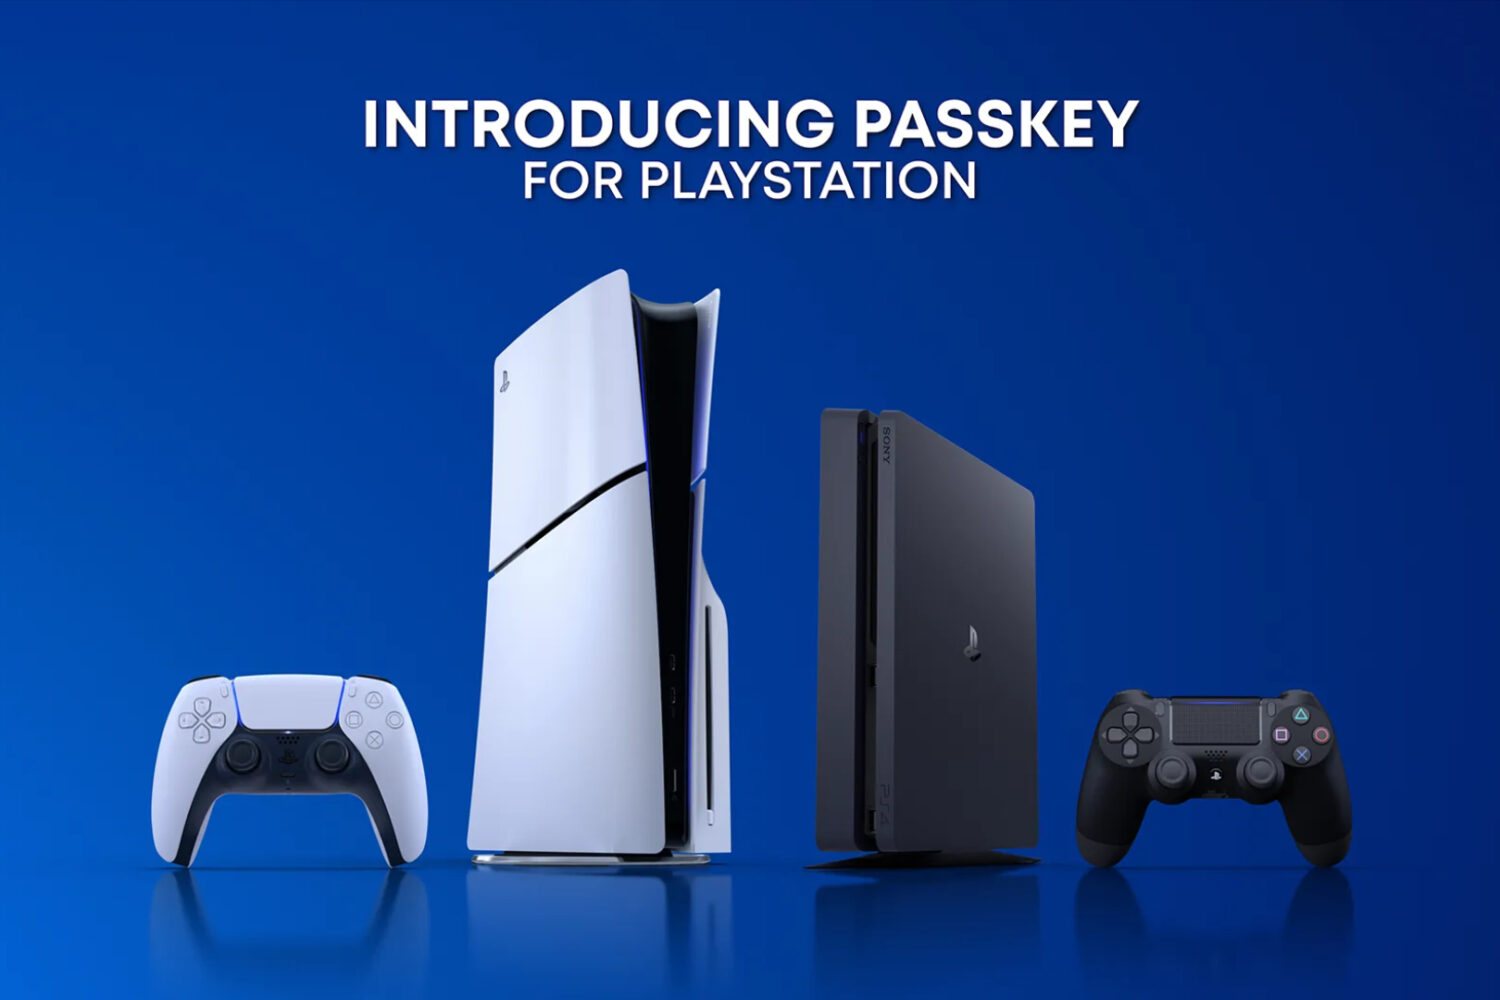 Marketing image showcasing the PlayStation 4 and 5 consoles with their gamepads, set against a blue gradient background with the tagline "Introducing passkey for PlayStation" at the top